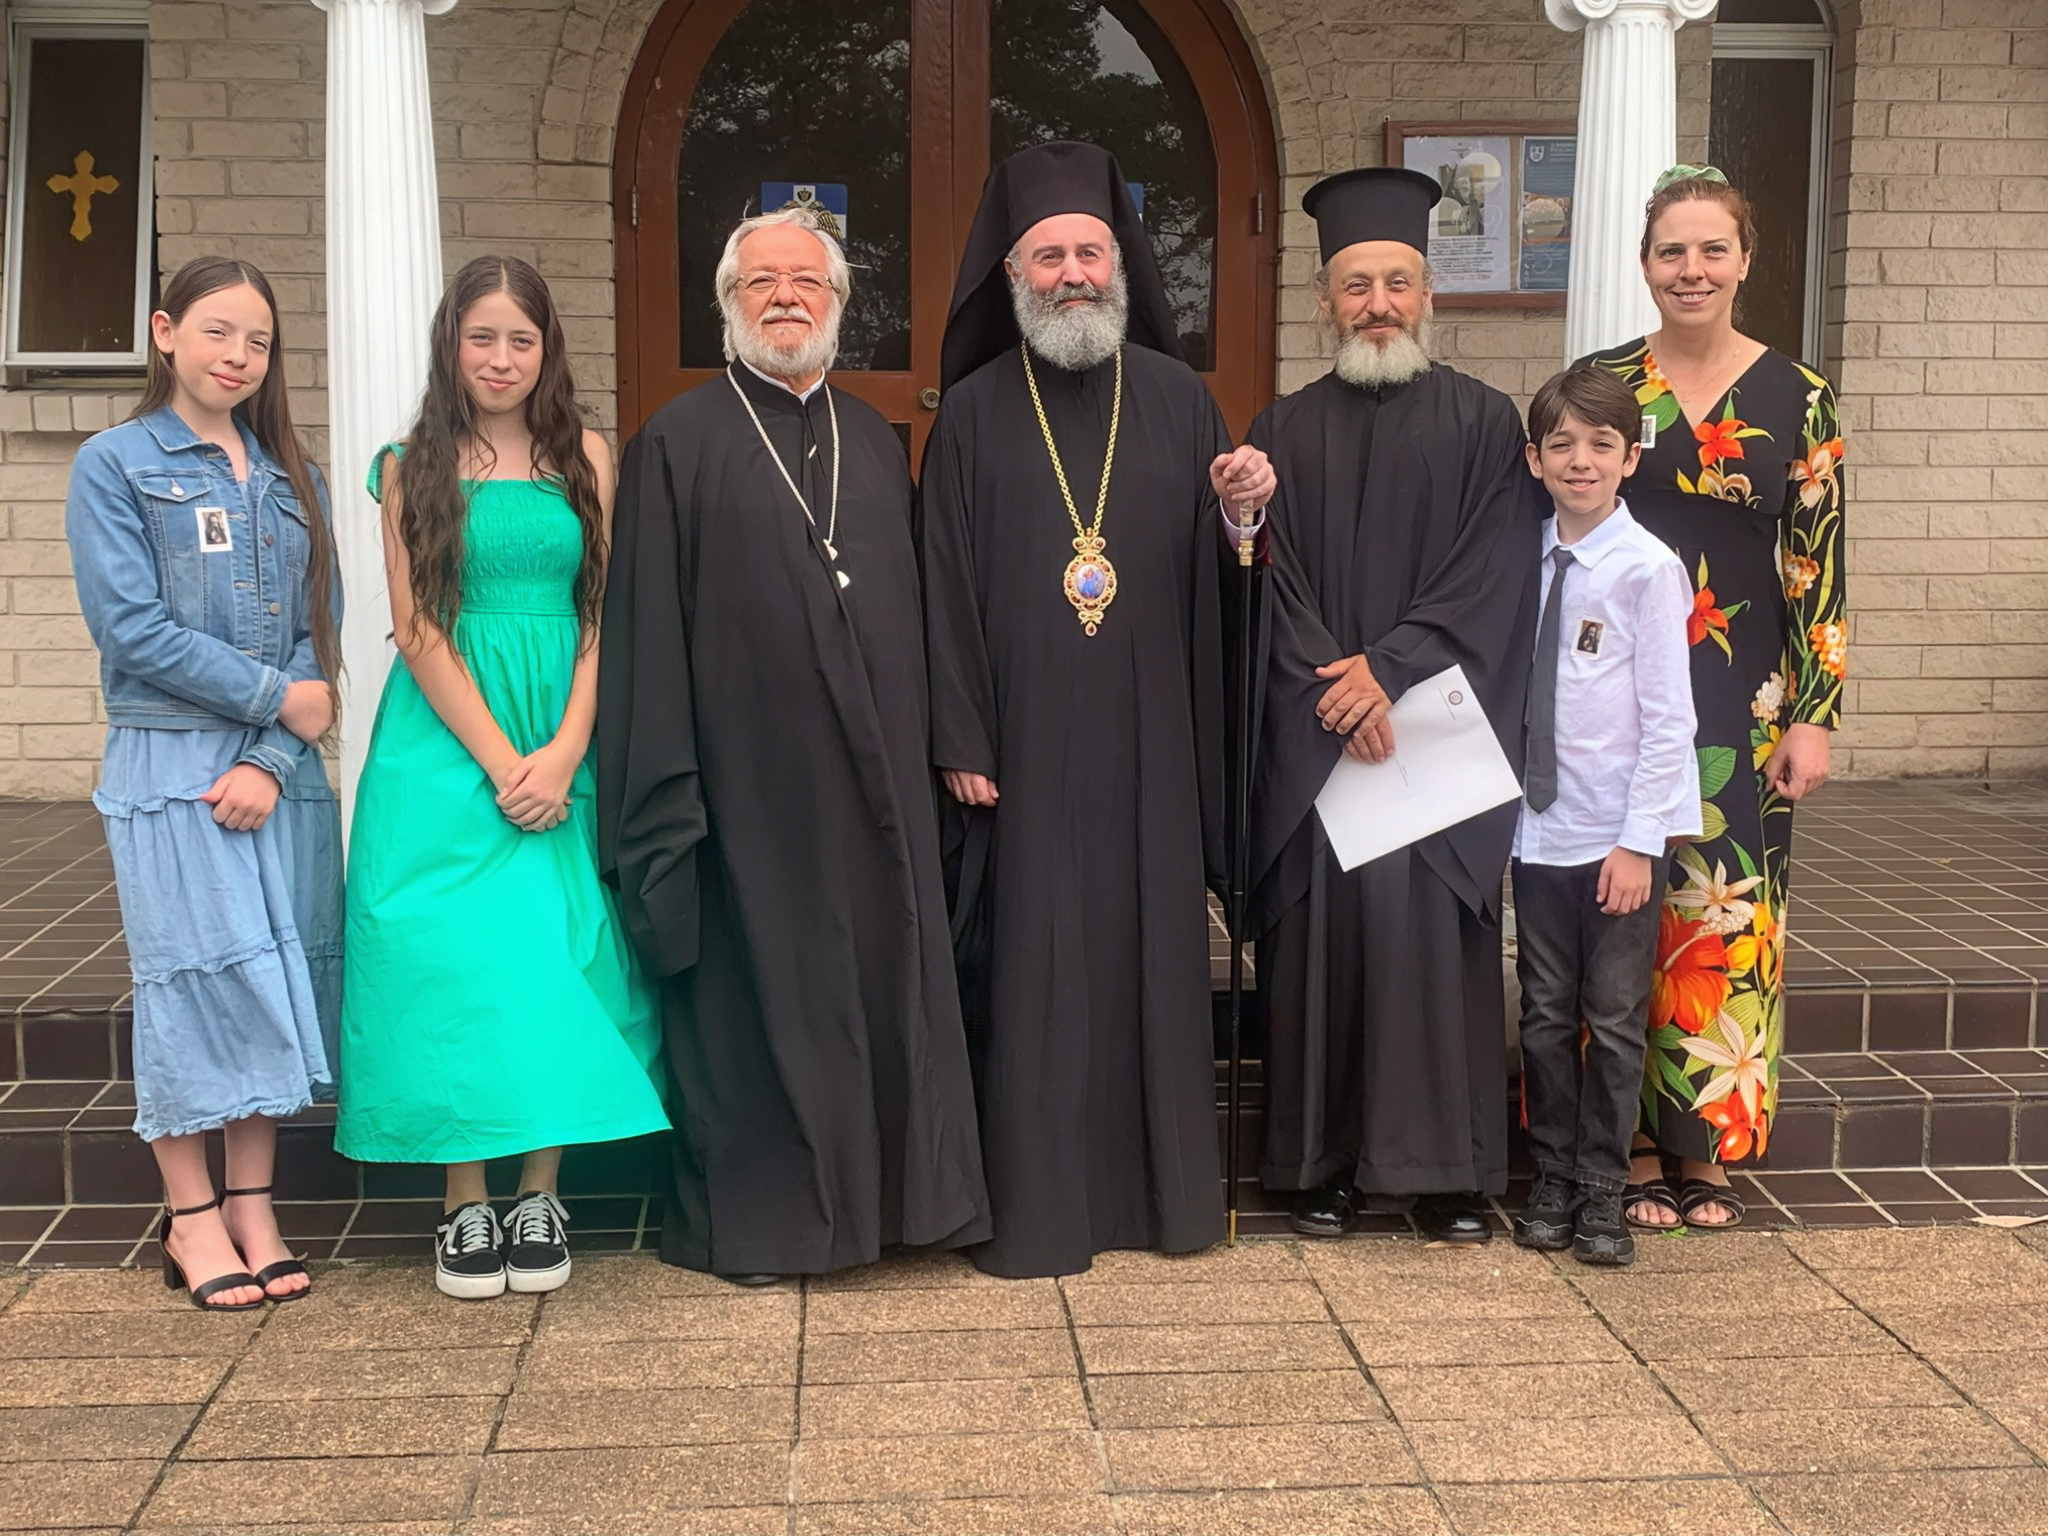 Ordination to the diaconate and tonsure of readers by Archbishop Makarios of Australia in Newcastle